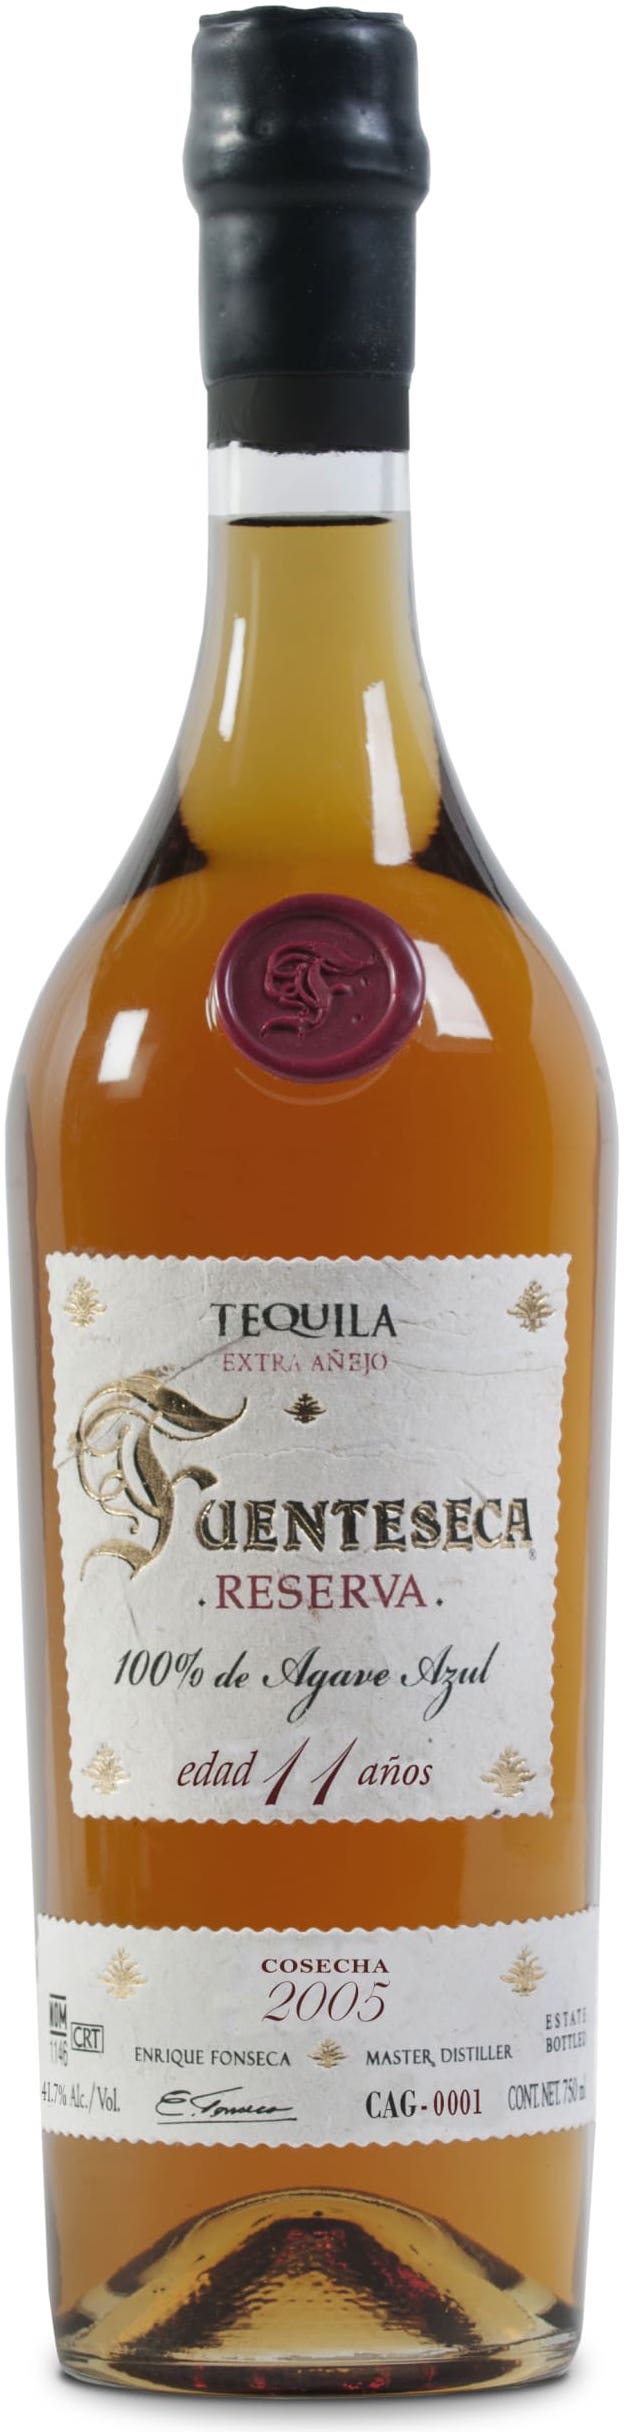 Fuenteseca Reserve Extra Anejo 11 Year Old 2005 750ml-0